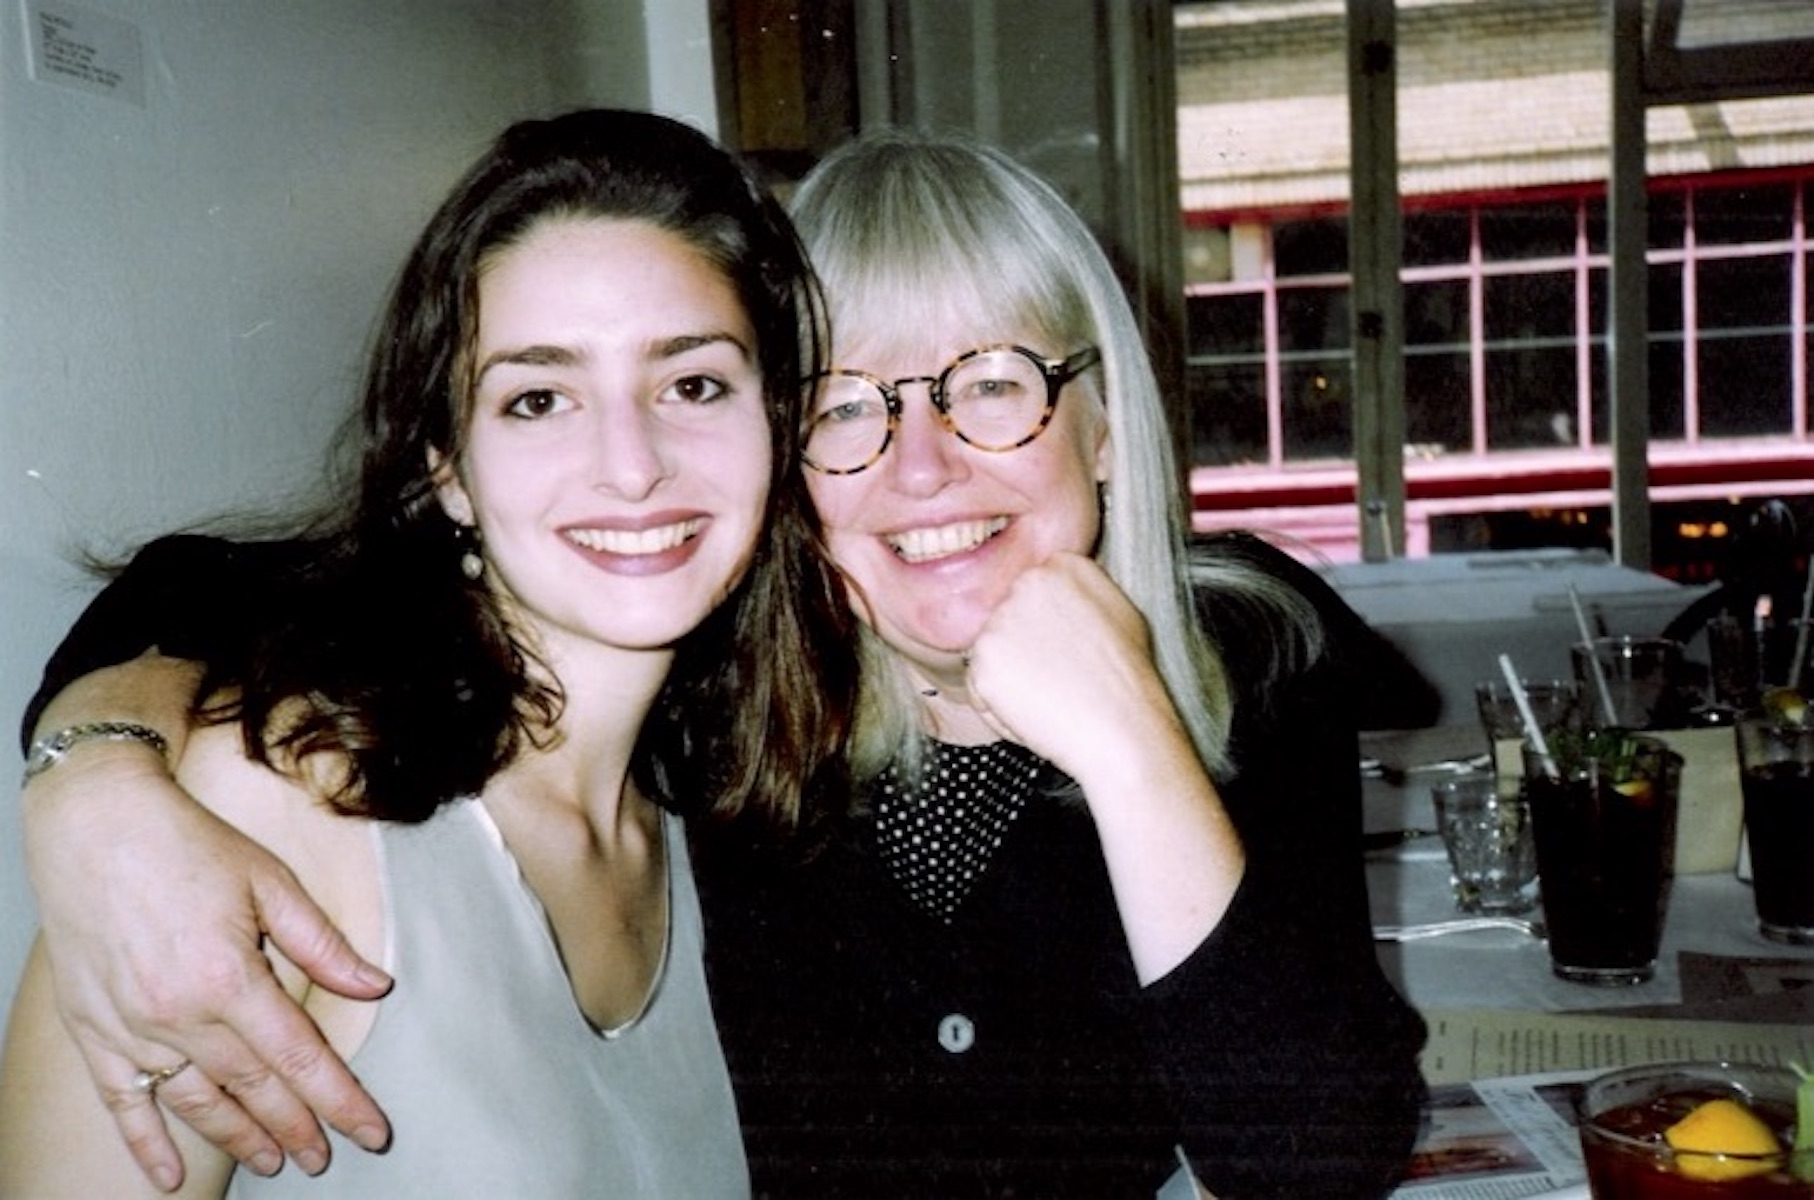 Susan with her daughter, 1990s. Photo courtesy of Susan Griffin.